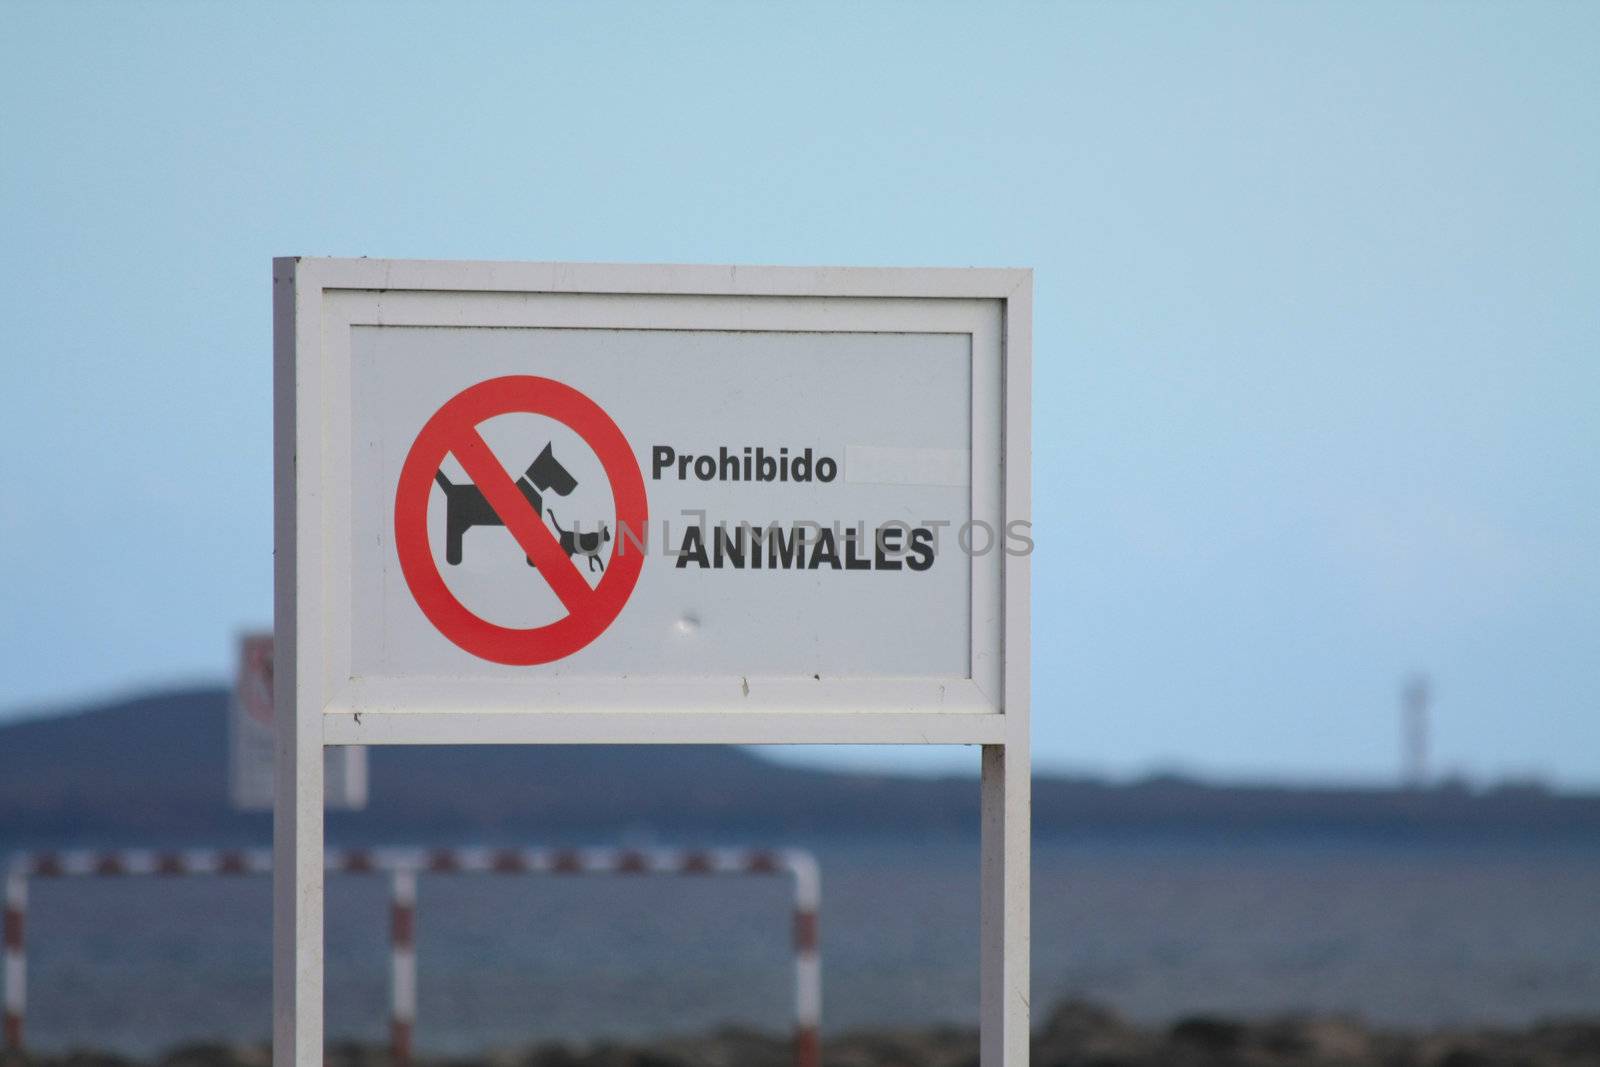 No animals allowed sign in Spanish, picturing a dog and a cat